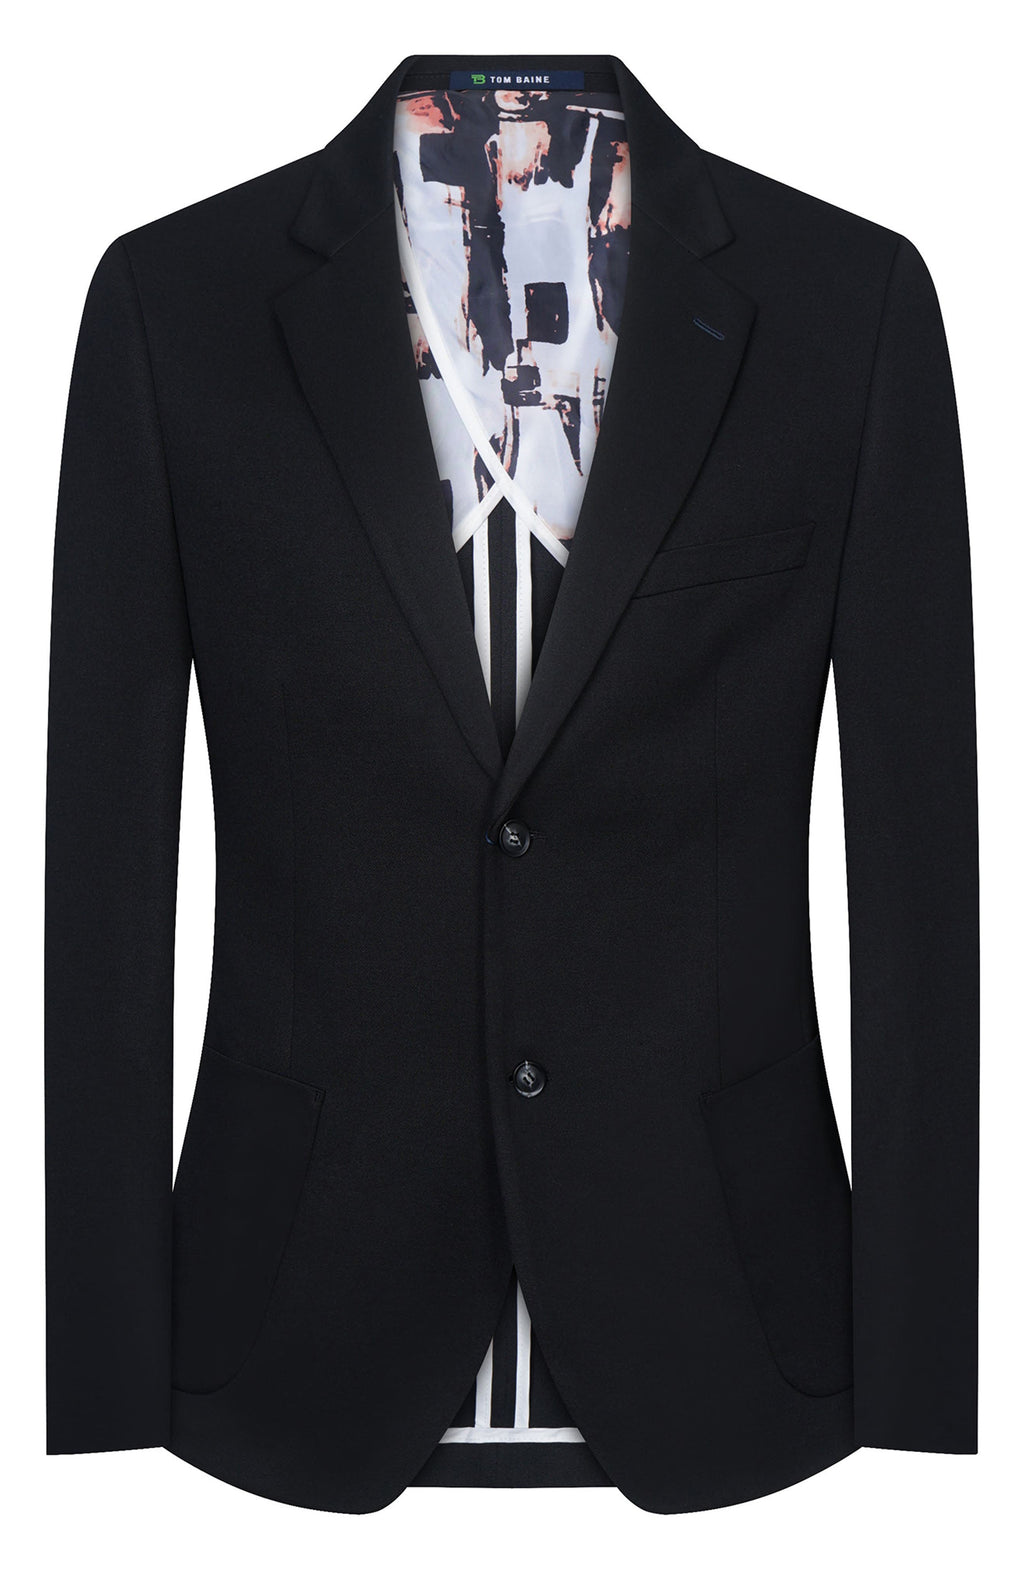 TOM BAINE Notch Collar Two Button 4-Way Stretch Jacket, Main, color, BLACK